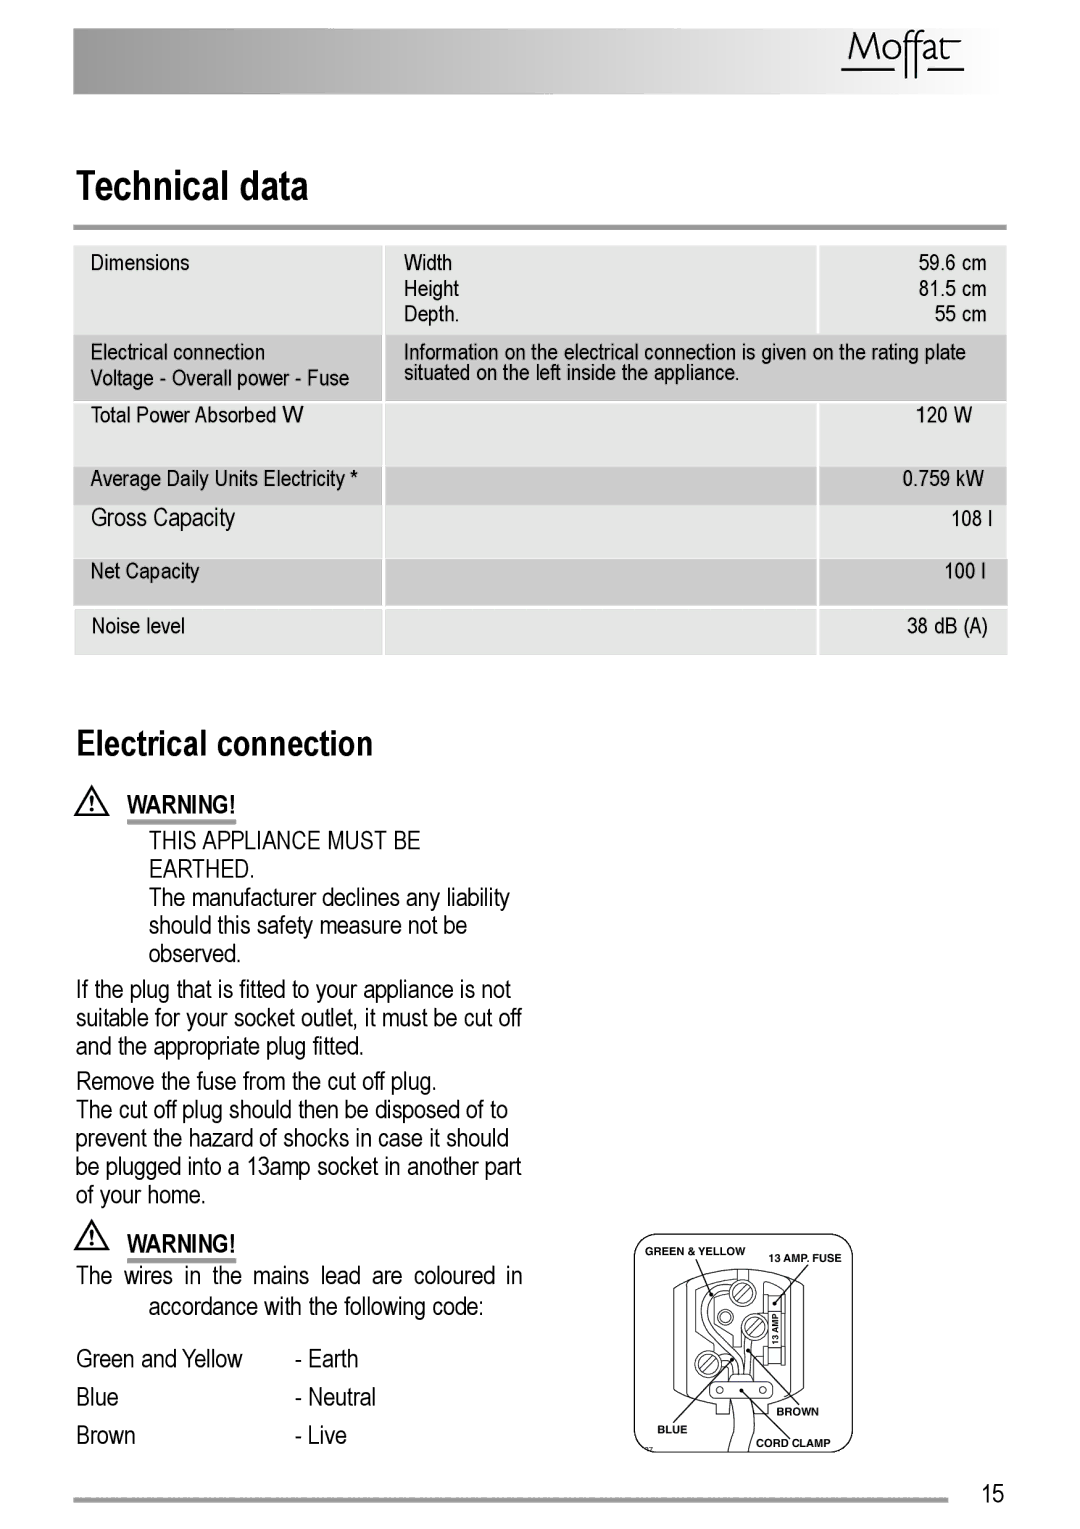 Electrolux U29065 user manual Technical data, Electrical connection 